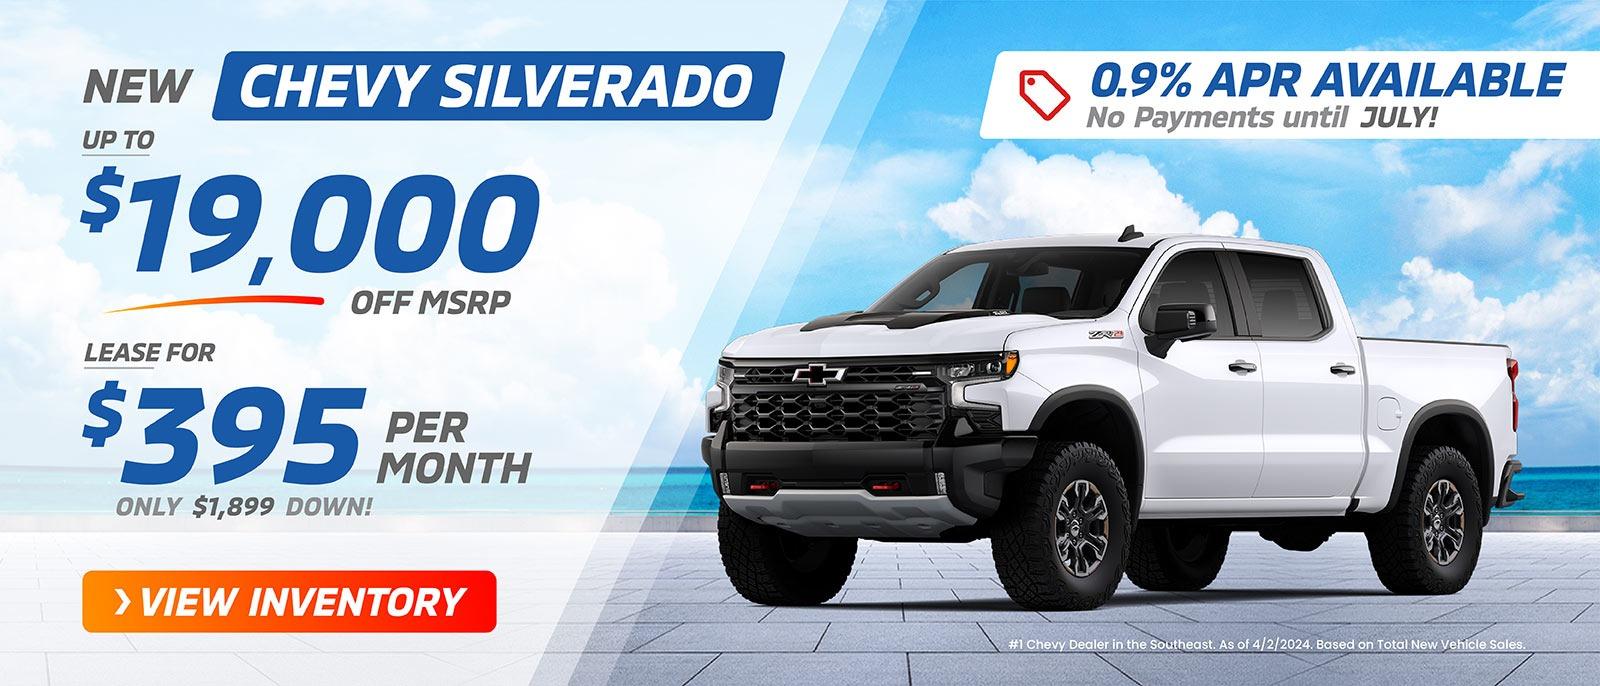 New Chevy Silverado
UP TO $19,000 OFF MSRP
OR $395 per month w/ $1899 down